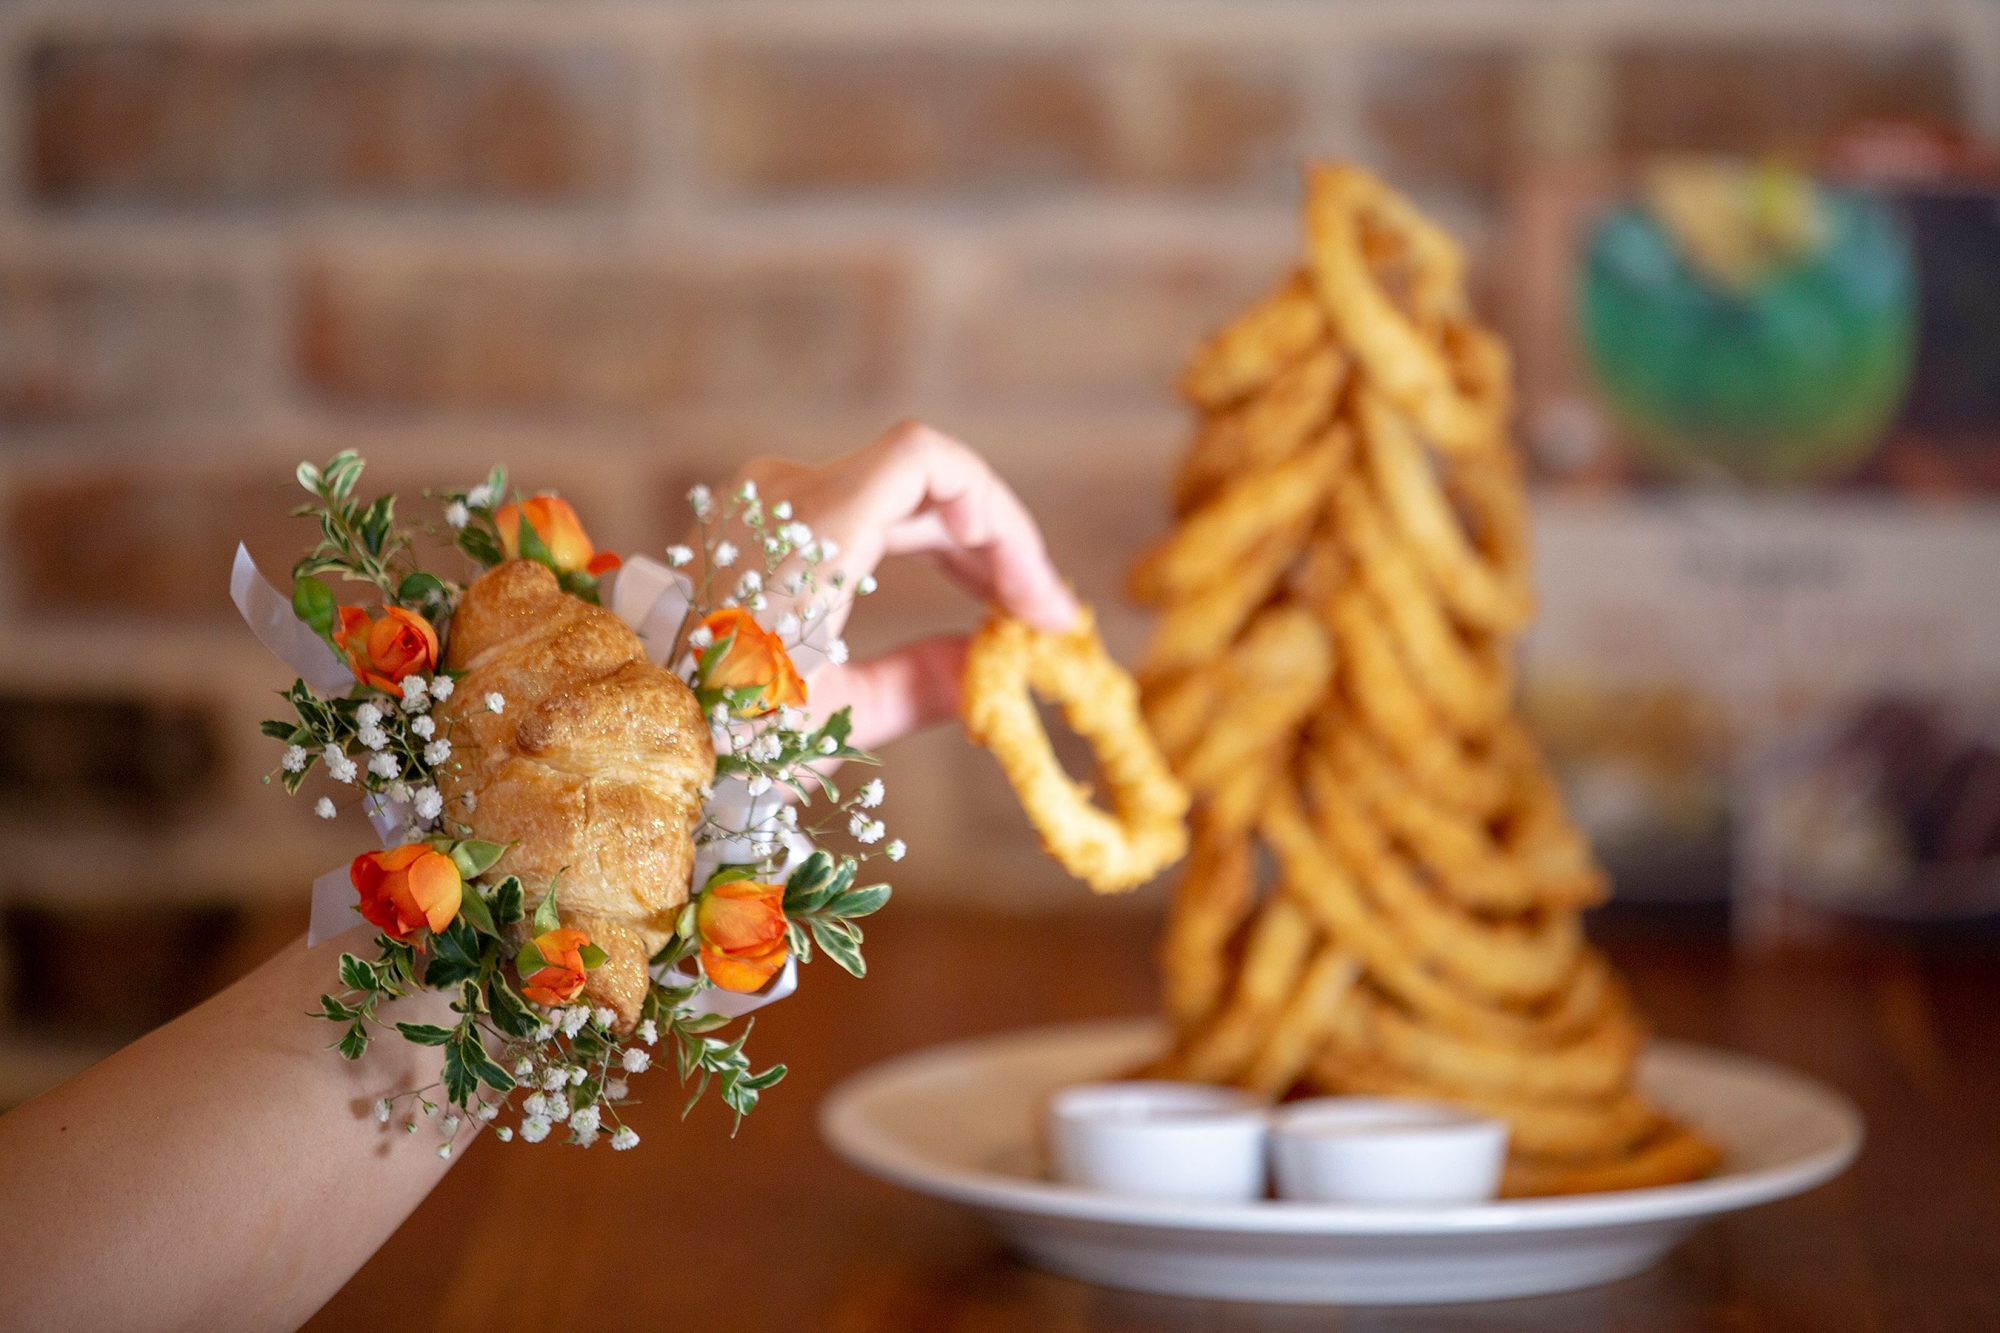 Croissant Corsages Are This Prom Season's Hottest Accessory &mdash; Here's Where to Get Them